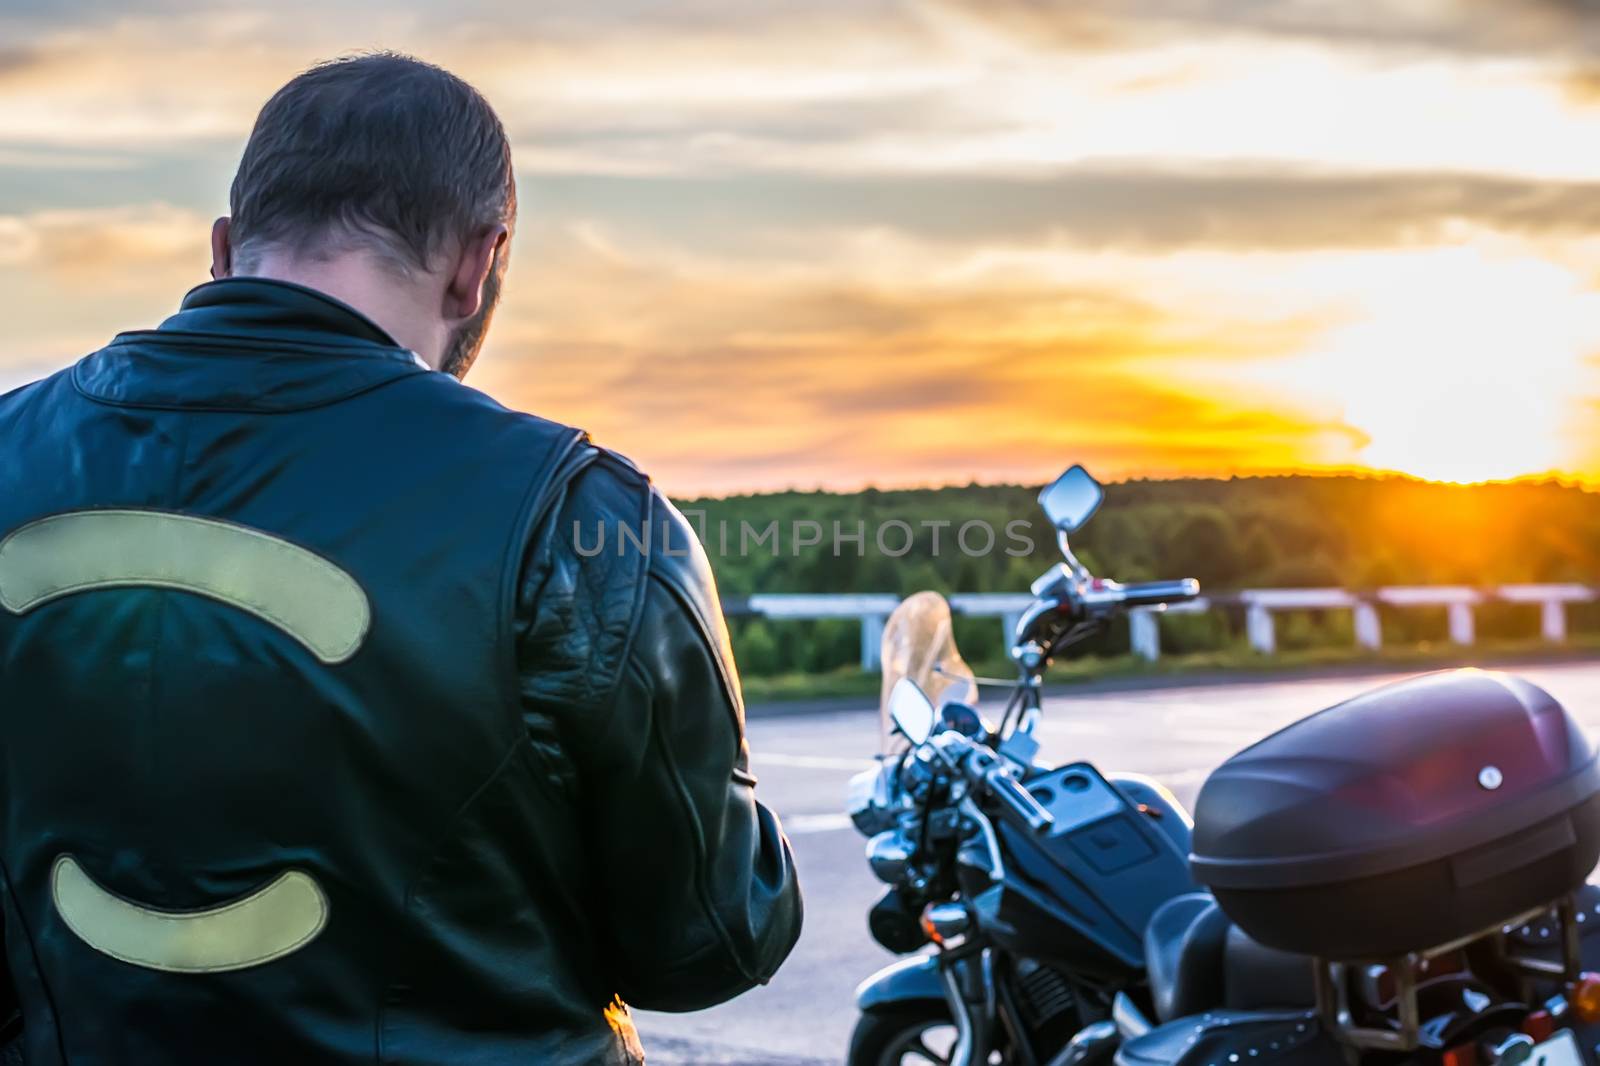 biker in a leather jacket standing next to the motorbike by jk3030